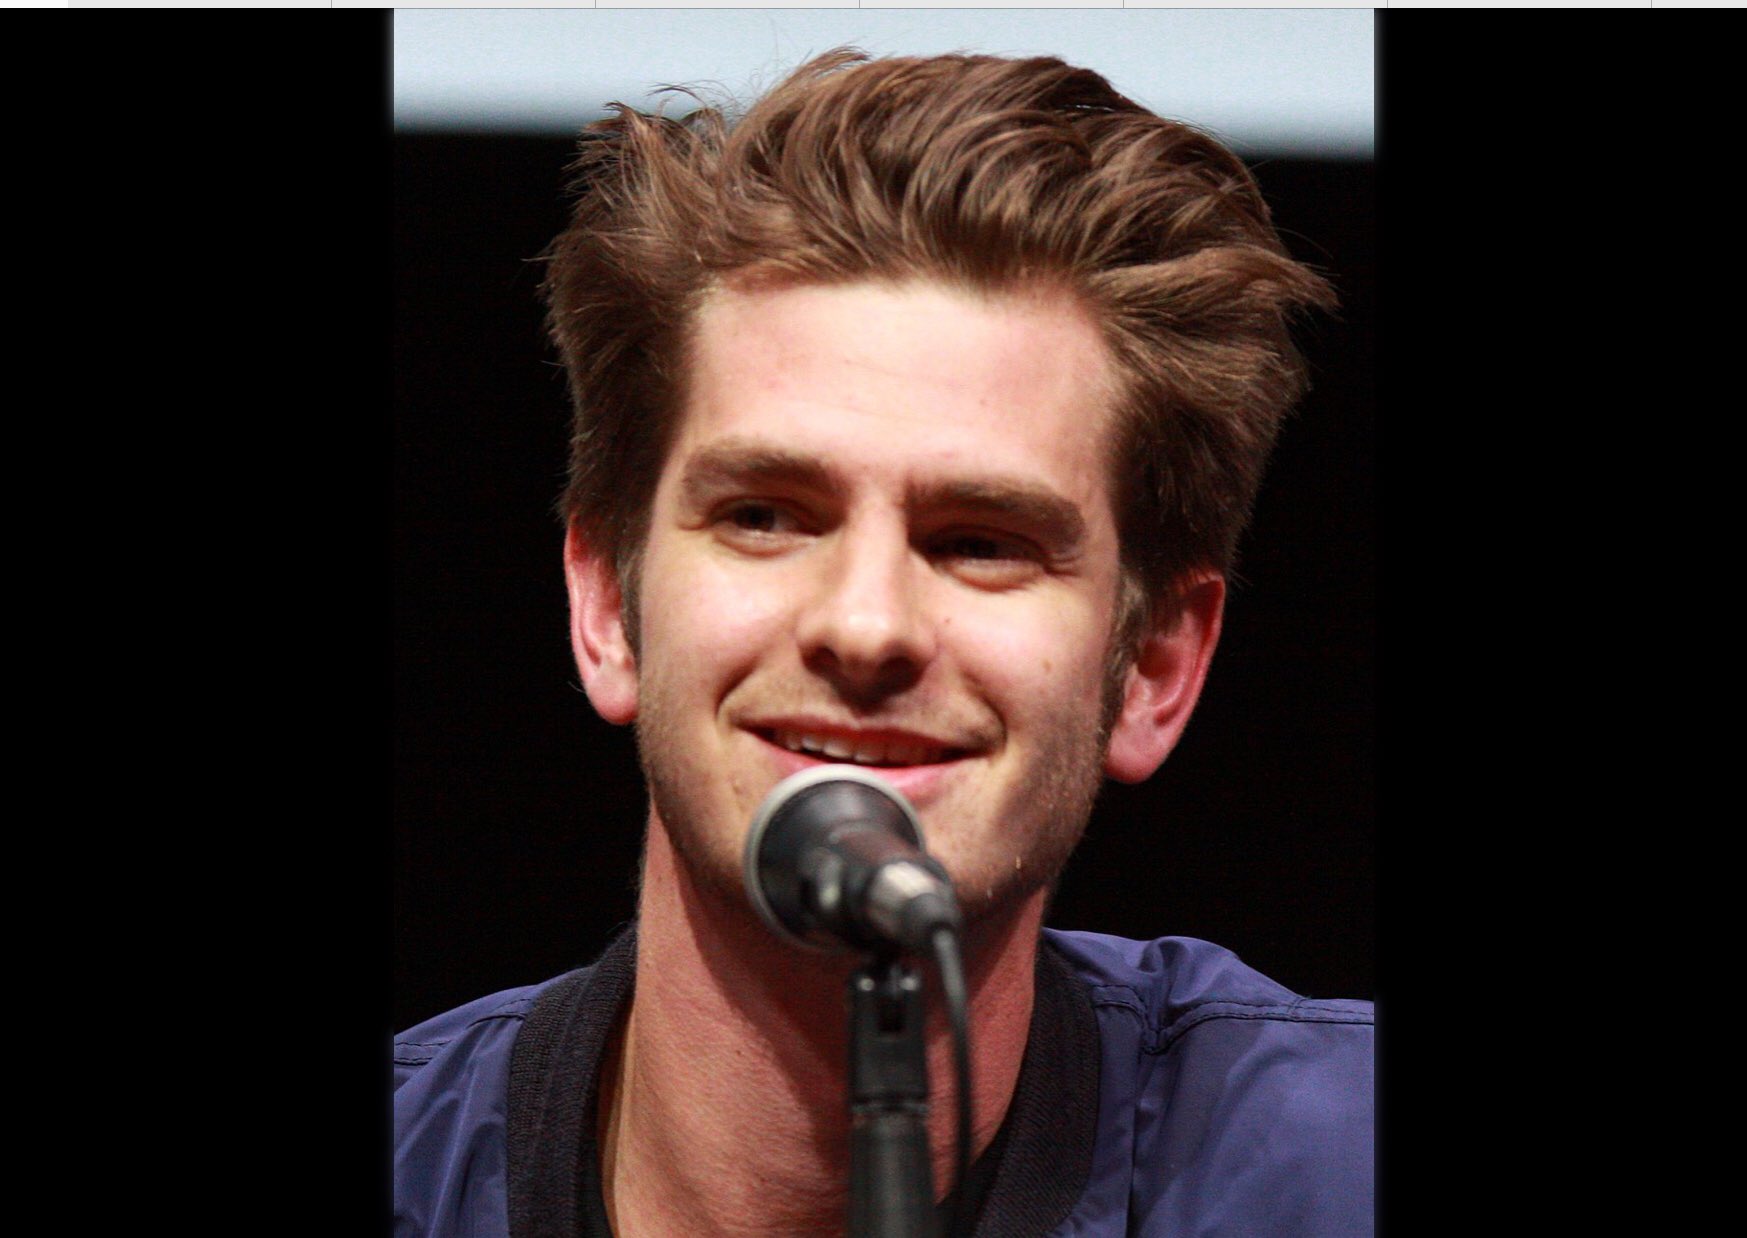 Happy 39th (I think) Birthday Andrew Garfield! You were awesome on playing Spider-Man 